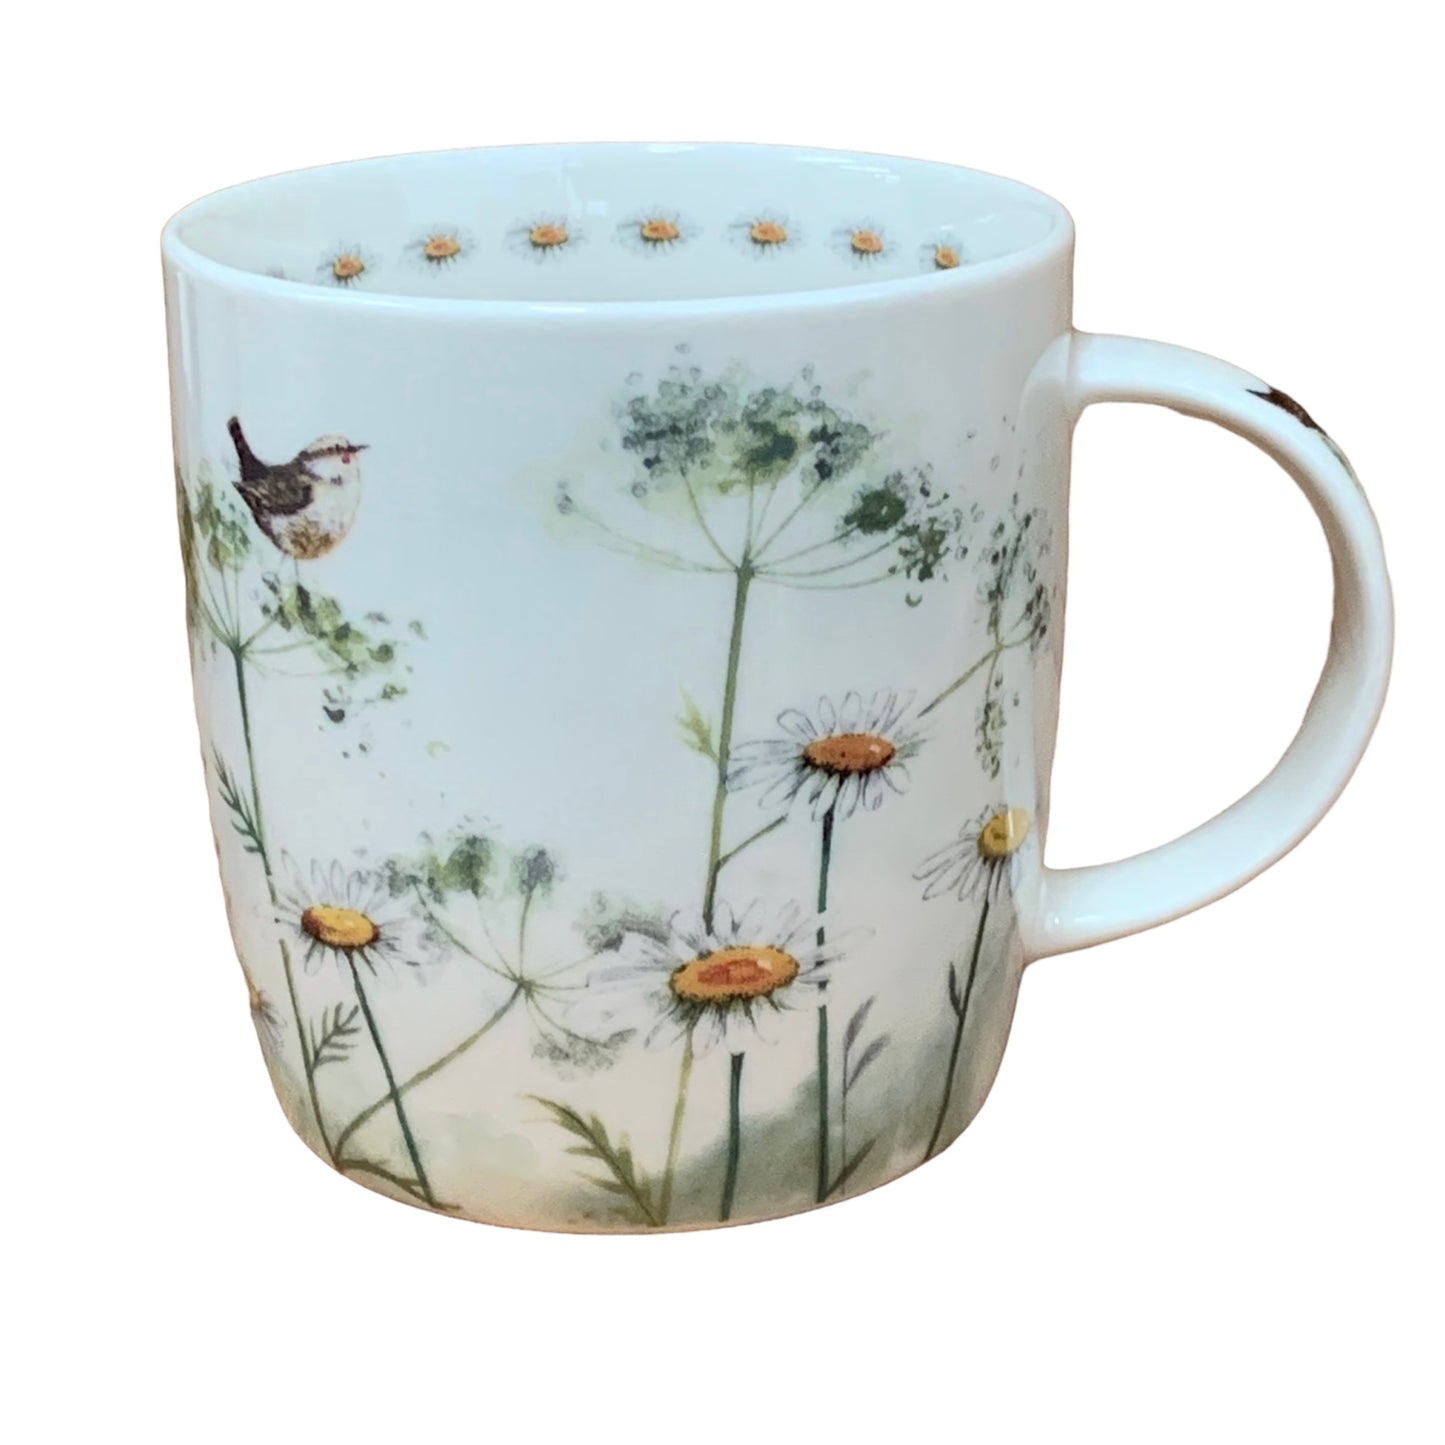 This Alex Clark mug is illustrated with a meadow of white cow parsley flowers & a little bird.   This mug also features a flower illustration around the inside rim & illustrations down the handle.  